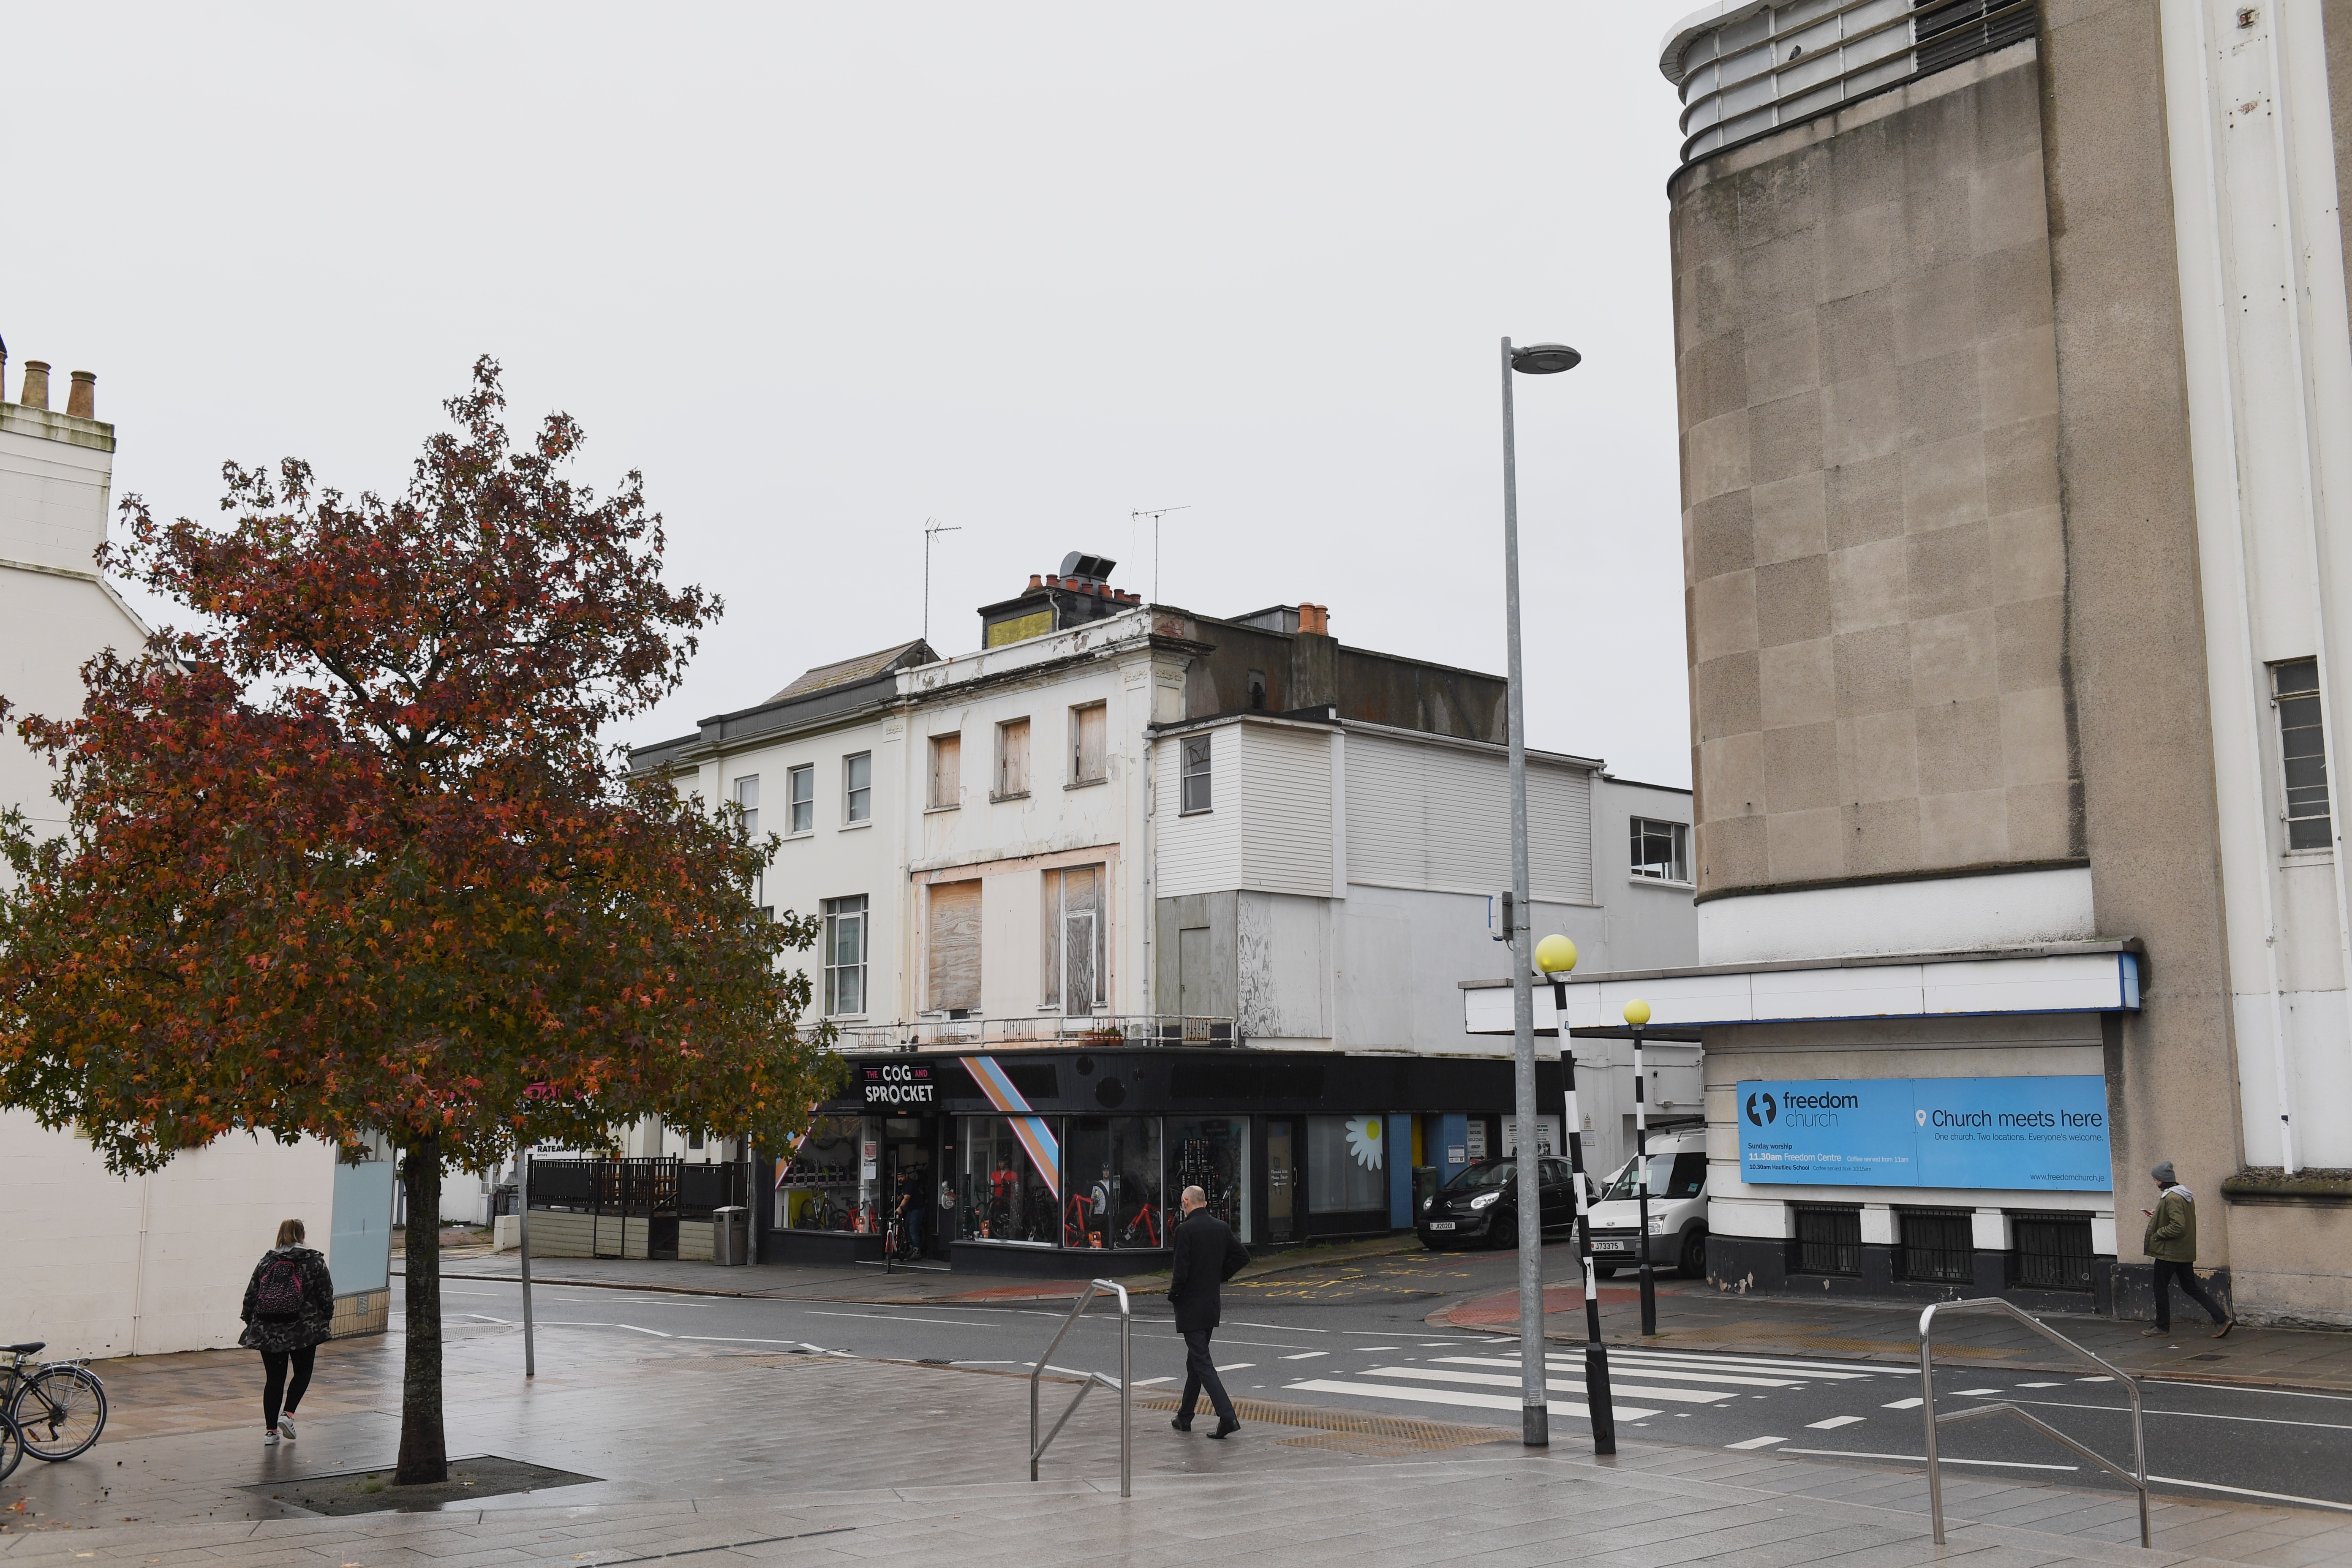 Bath Street, proposed site for a second Premier Inn next to the former Odeon cinema, now Freedom Church Picture: JON GUEGAN. (26497536)